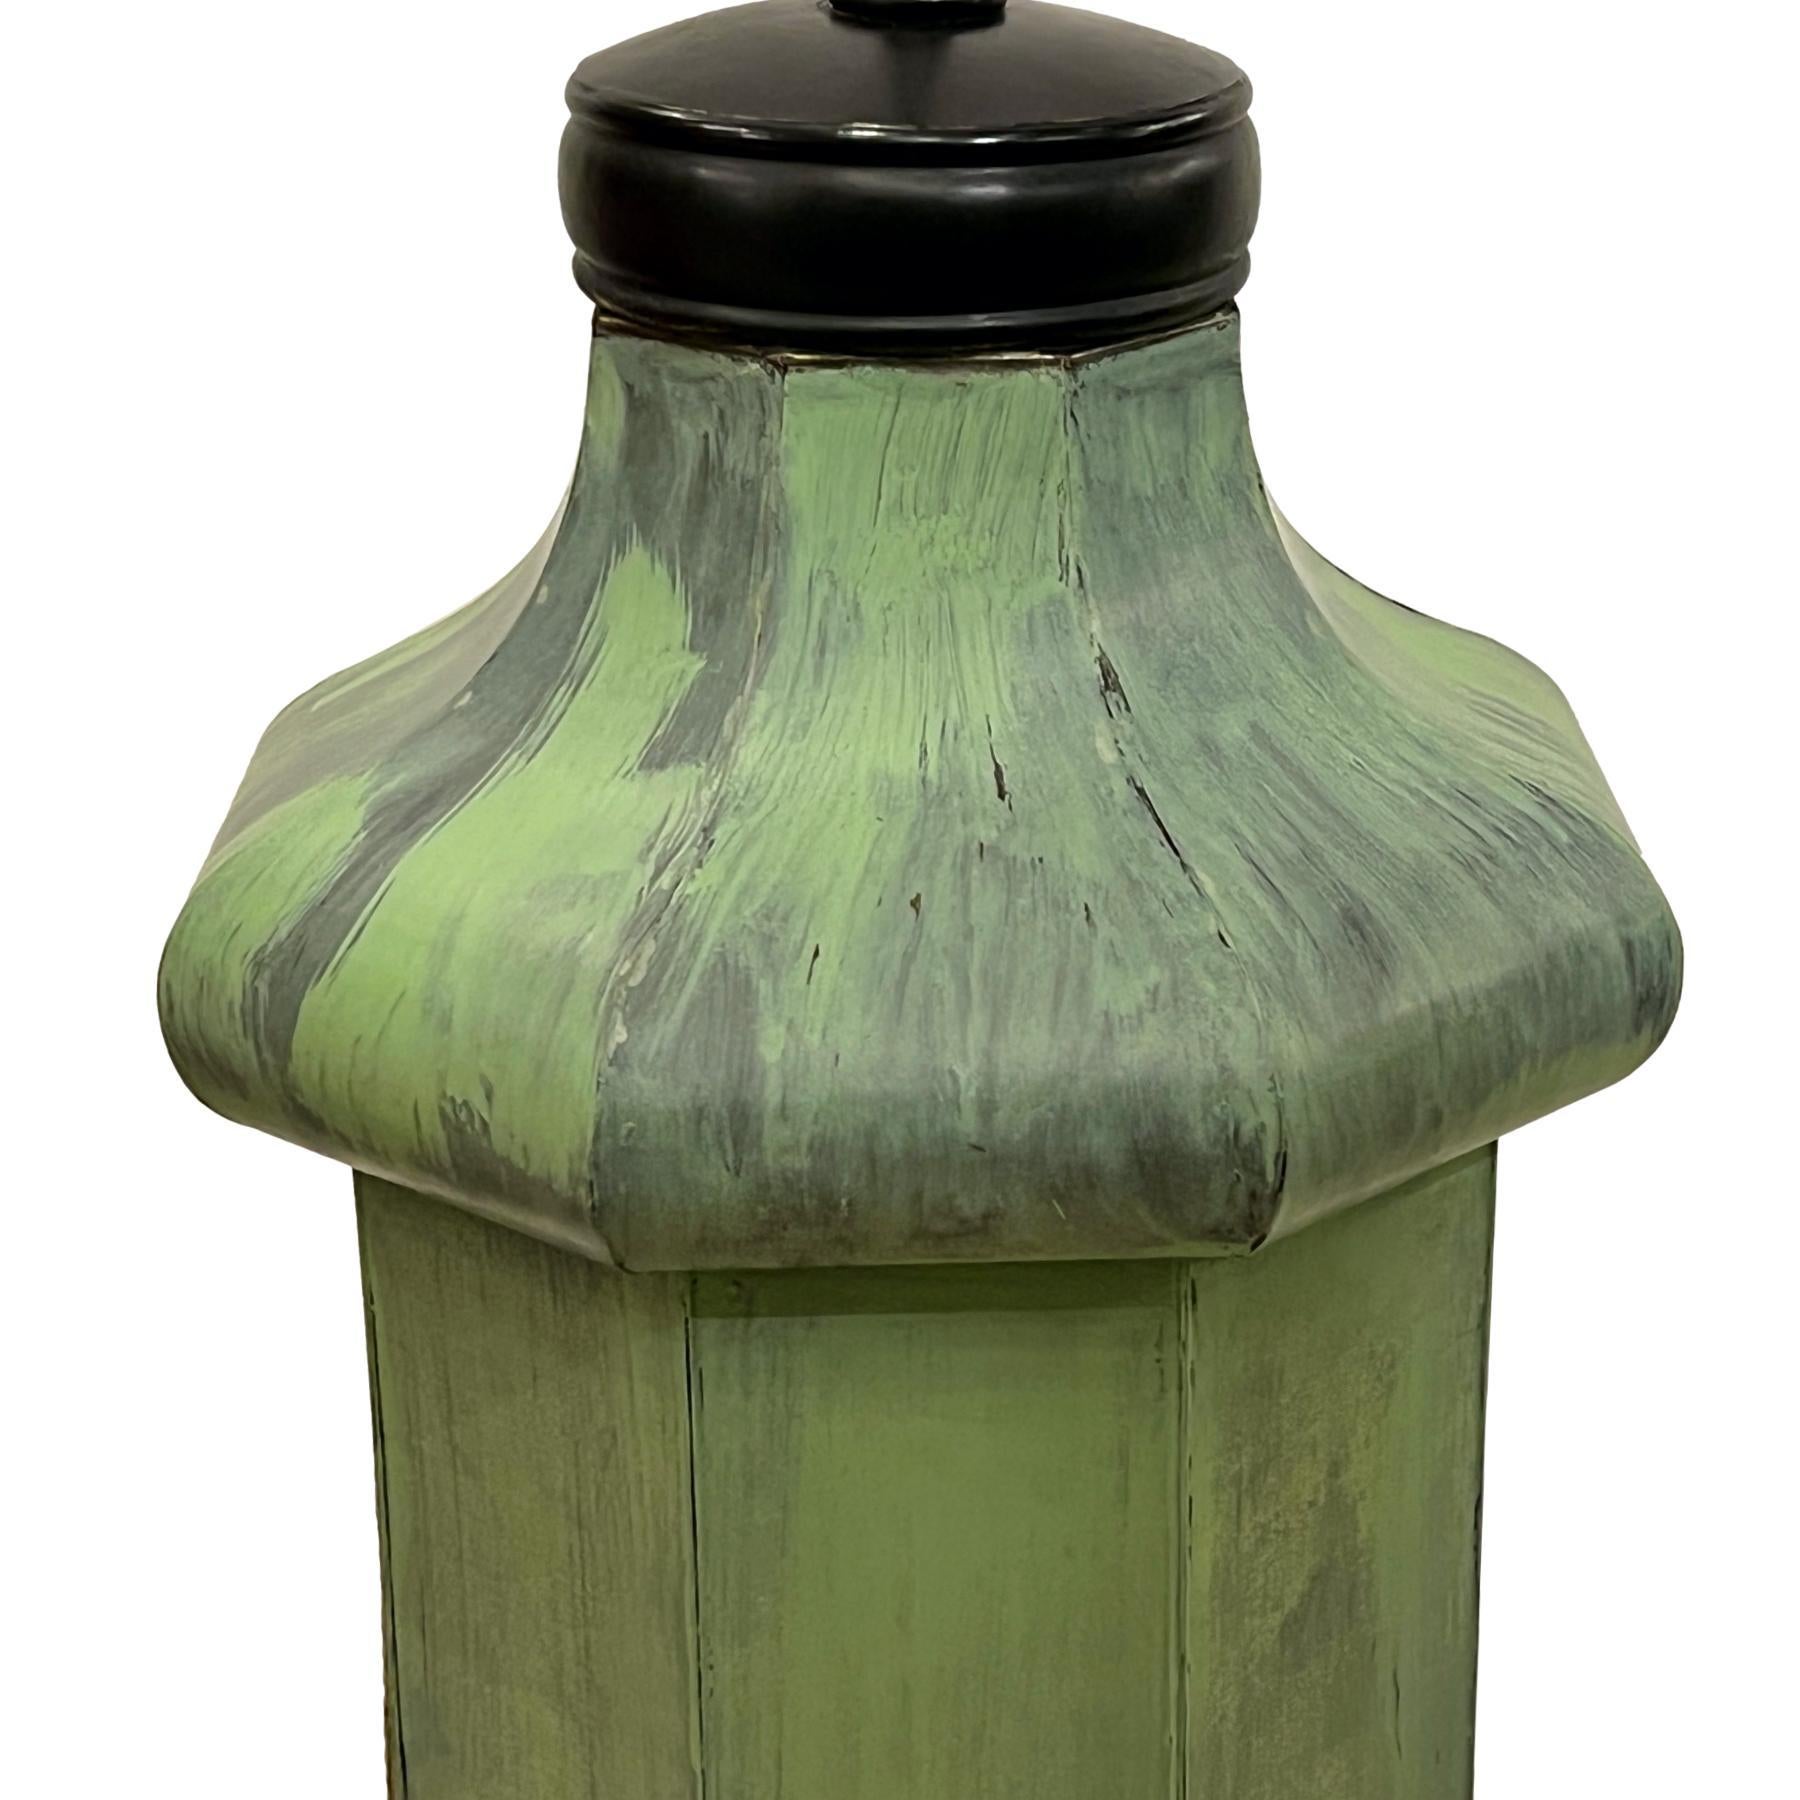 A single large circa 1920's English tole lamp with original patina.

Measurements:
Height of body: 28